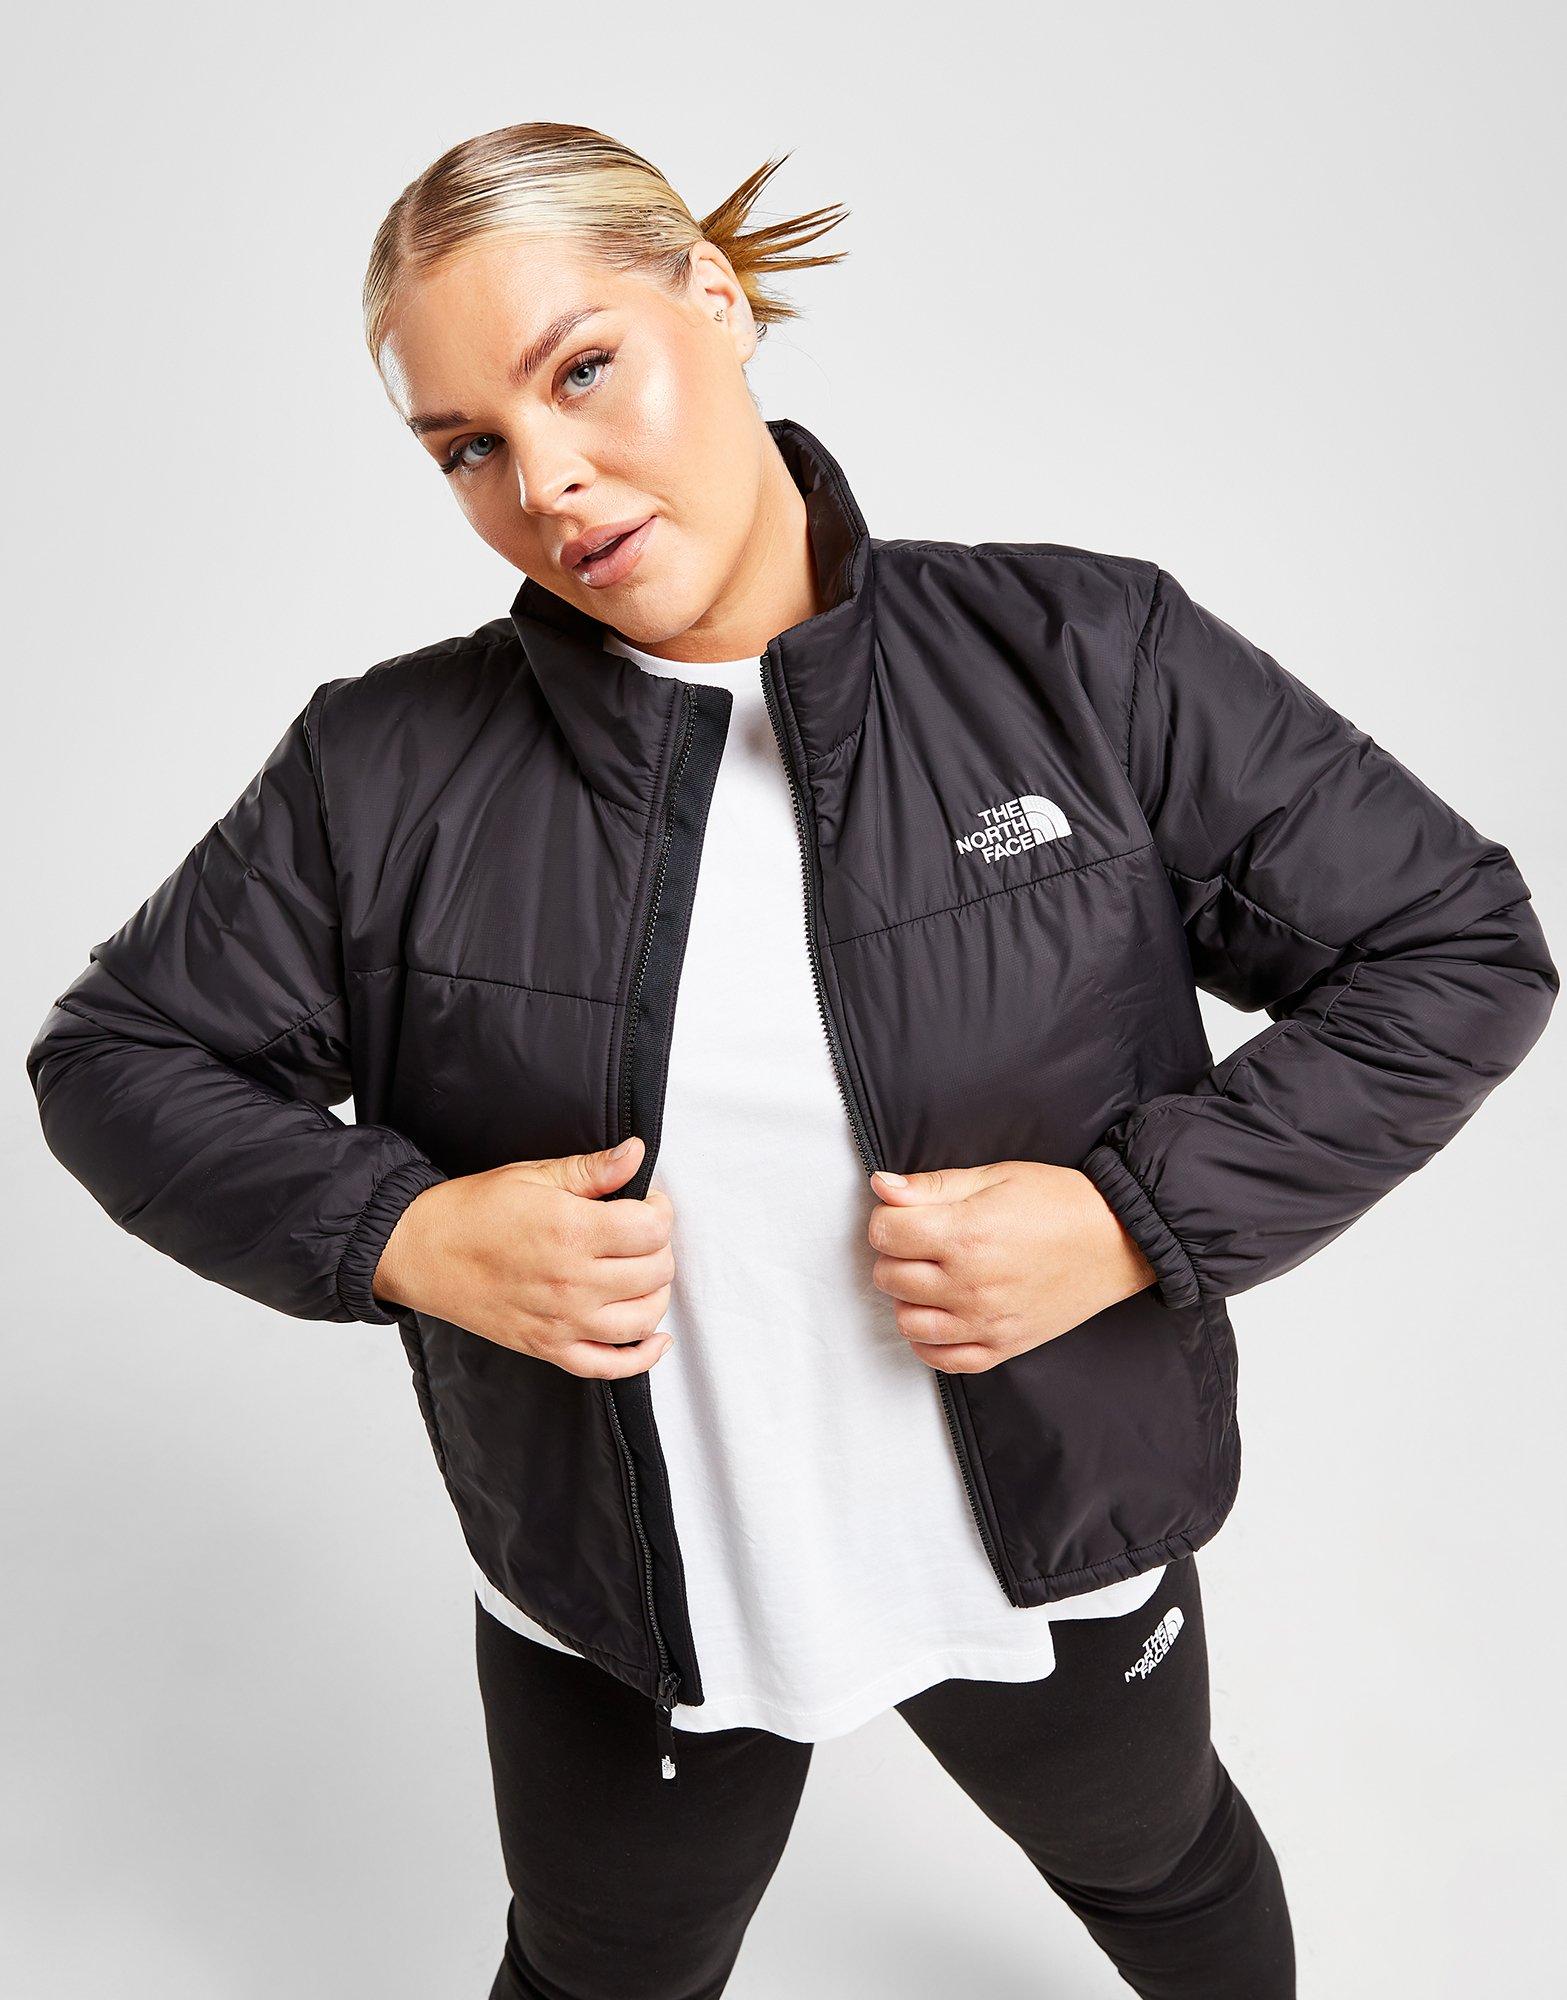 Sale  Women - The North Face Jackets - JD Sports Ireland